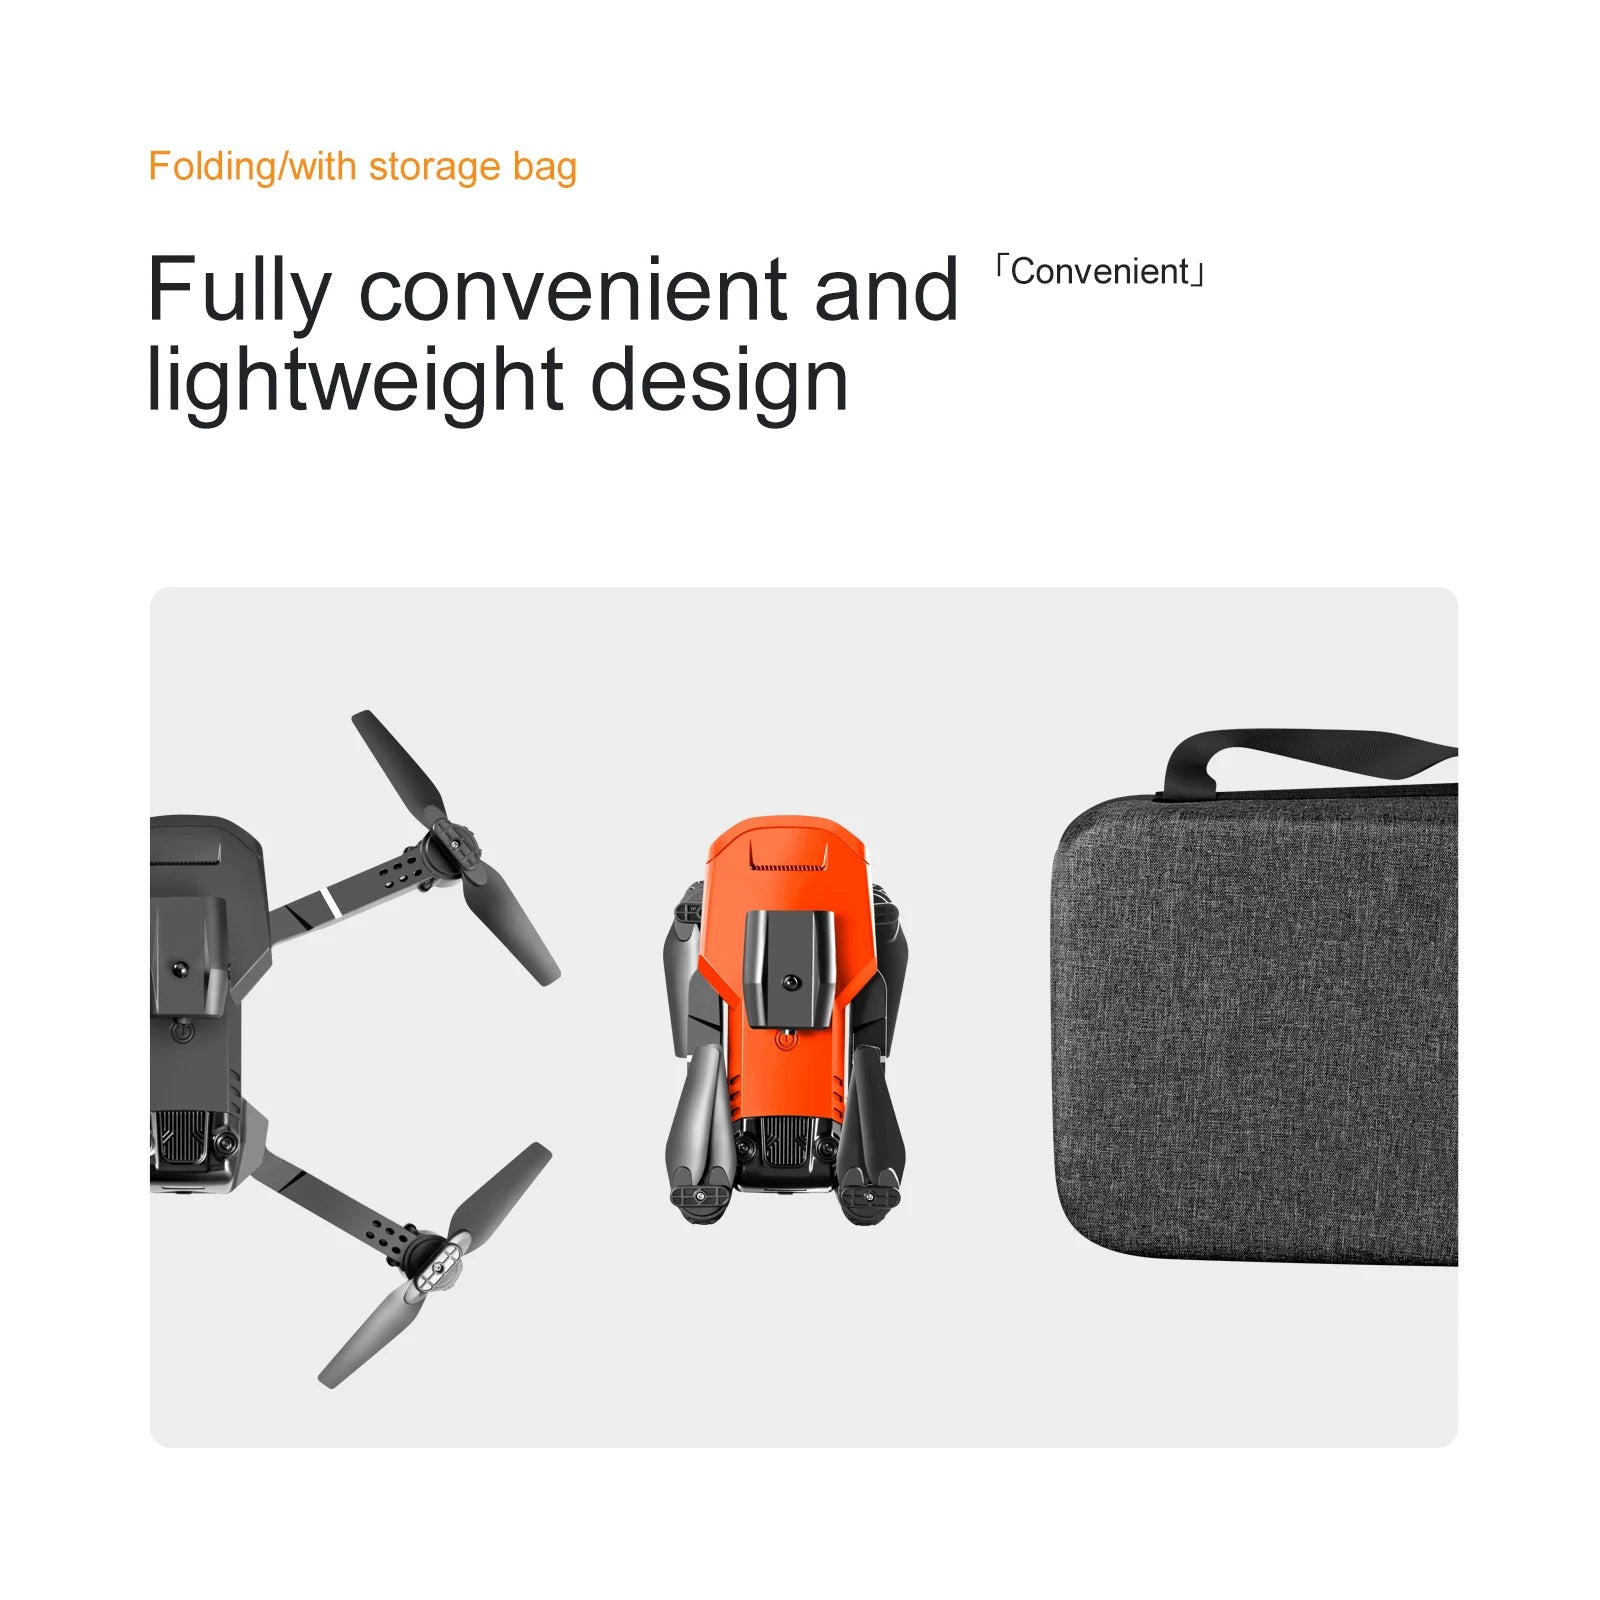 E100 Drone, lightweight design bag with storage fully convenient and tconvenient 